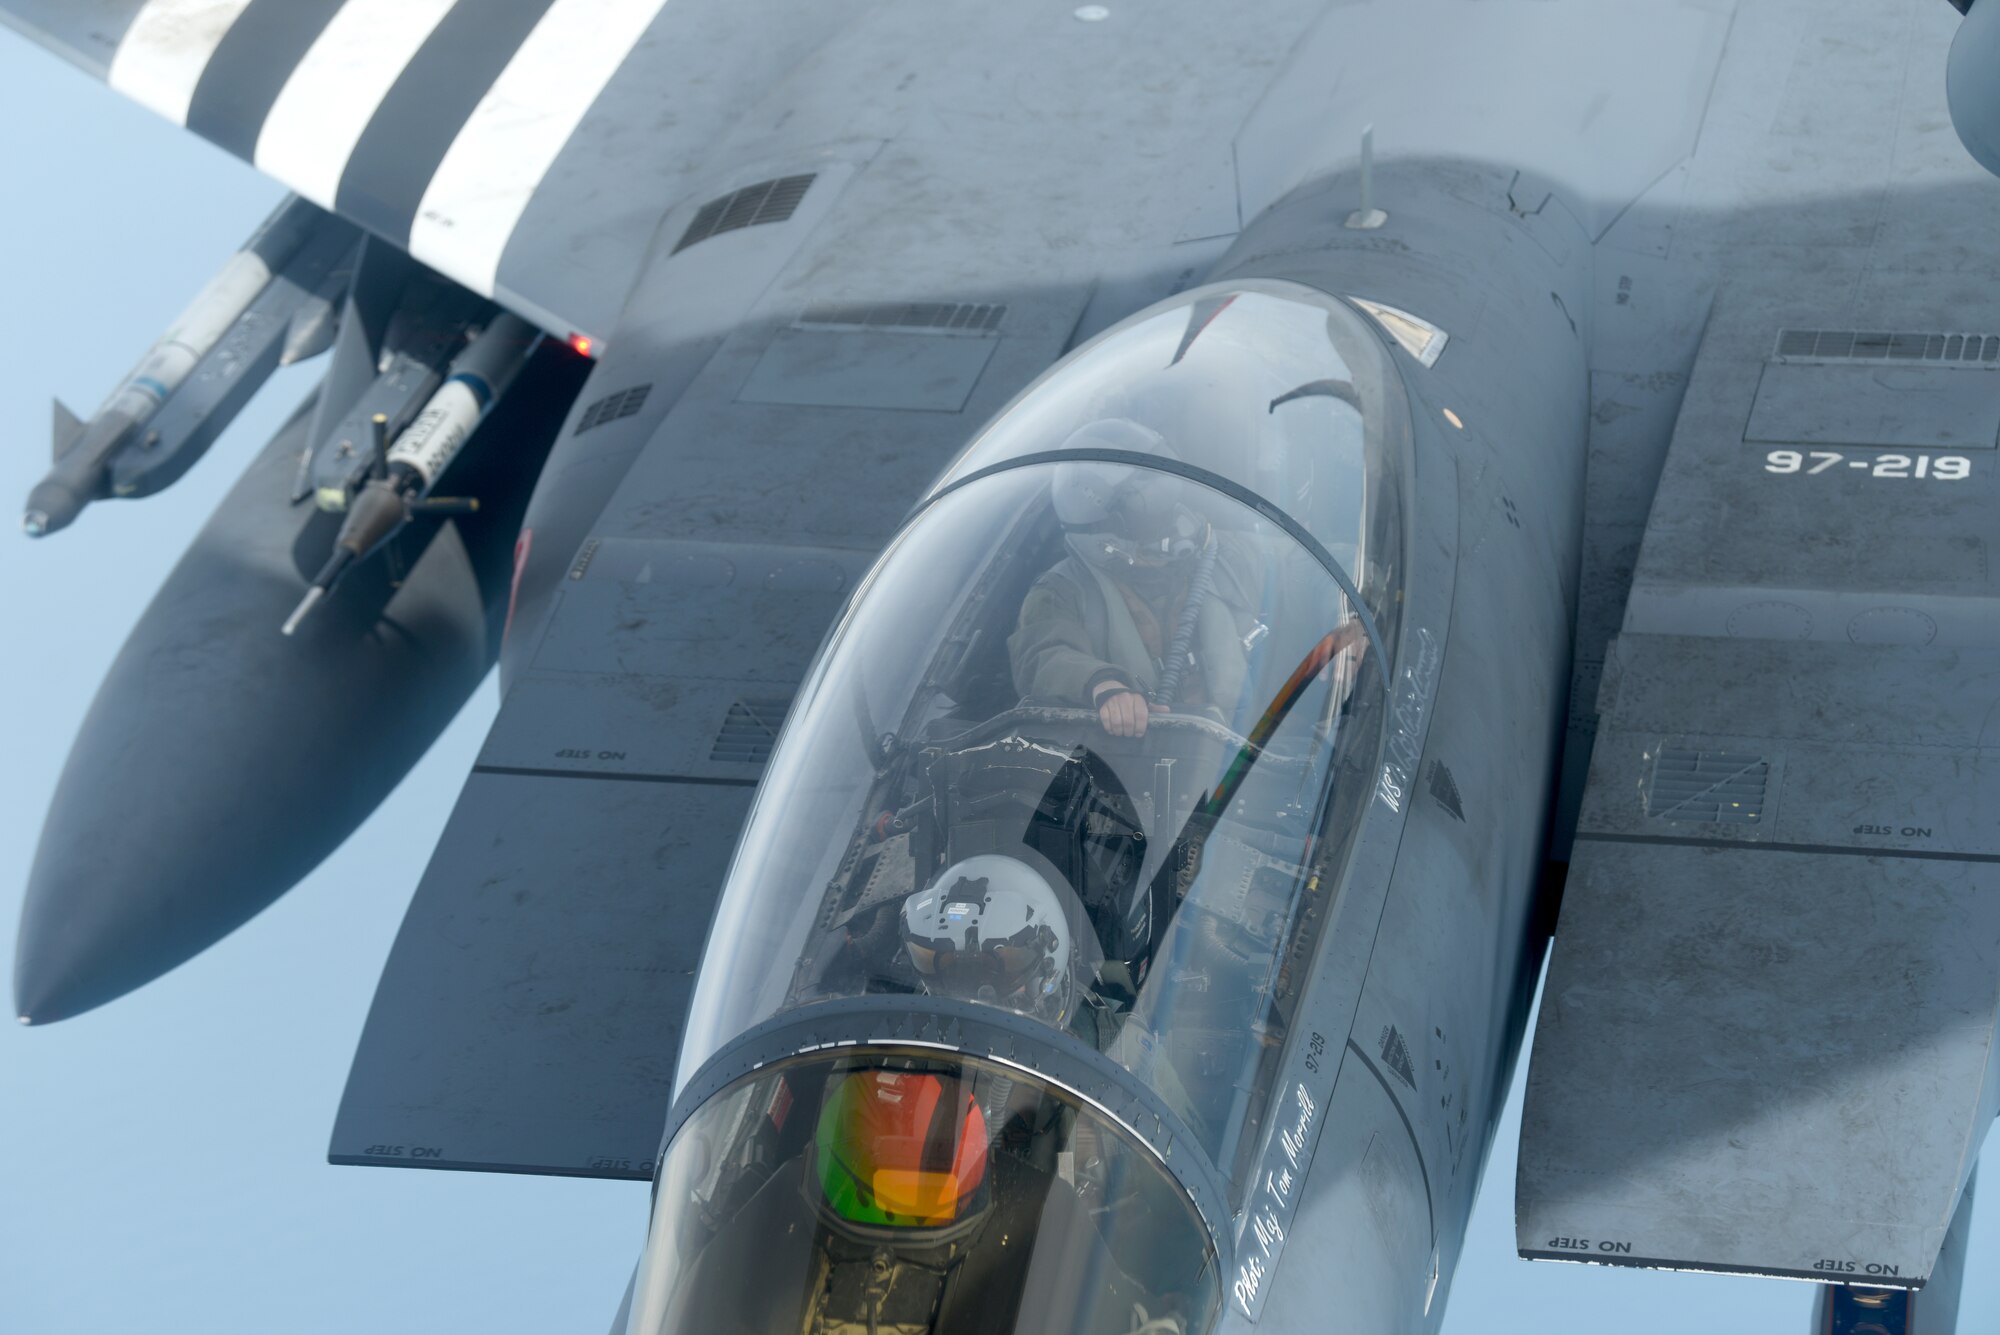 An F-15E Strike Eagle assigned to the 48th Fighter Wing at RAF Lakenheath, England, painted in the heritage colors of its World War II P-47 Thunderbolt predecessor, receives fuel from a 351st Air Refueling Squadron KC-135 Stratotanker at RAF Mildenhall during the “FURIOUS 48” readiness exercise over the skies of England, April 24, 2019. The exercise was designed to emphasize the importance of combat skills effectiveness training and test 100th ARW and 48th FW Airmen on their ability to survive and operate in wartime conditions. (U.S. Air Force photo by Airman 1st Class Brandon Esau)